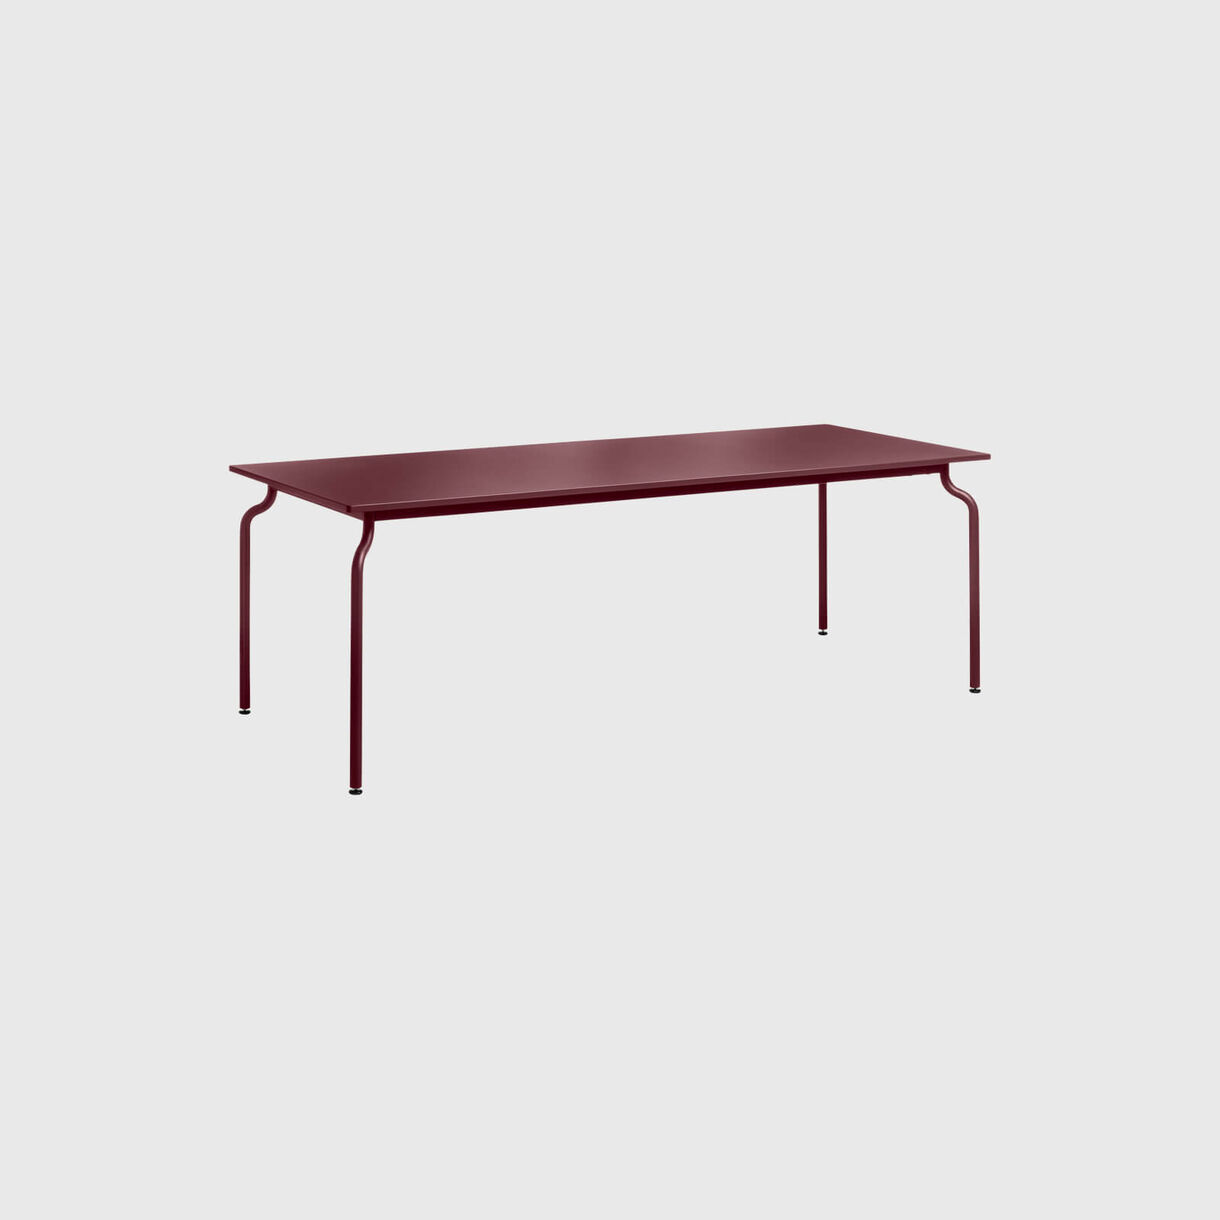 South Table, Steel, Red Bordeaux, 2000x900